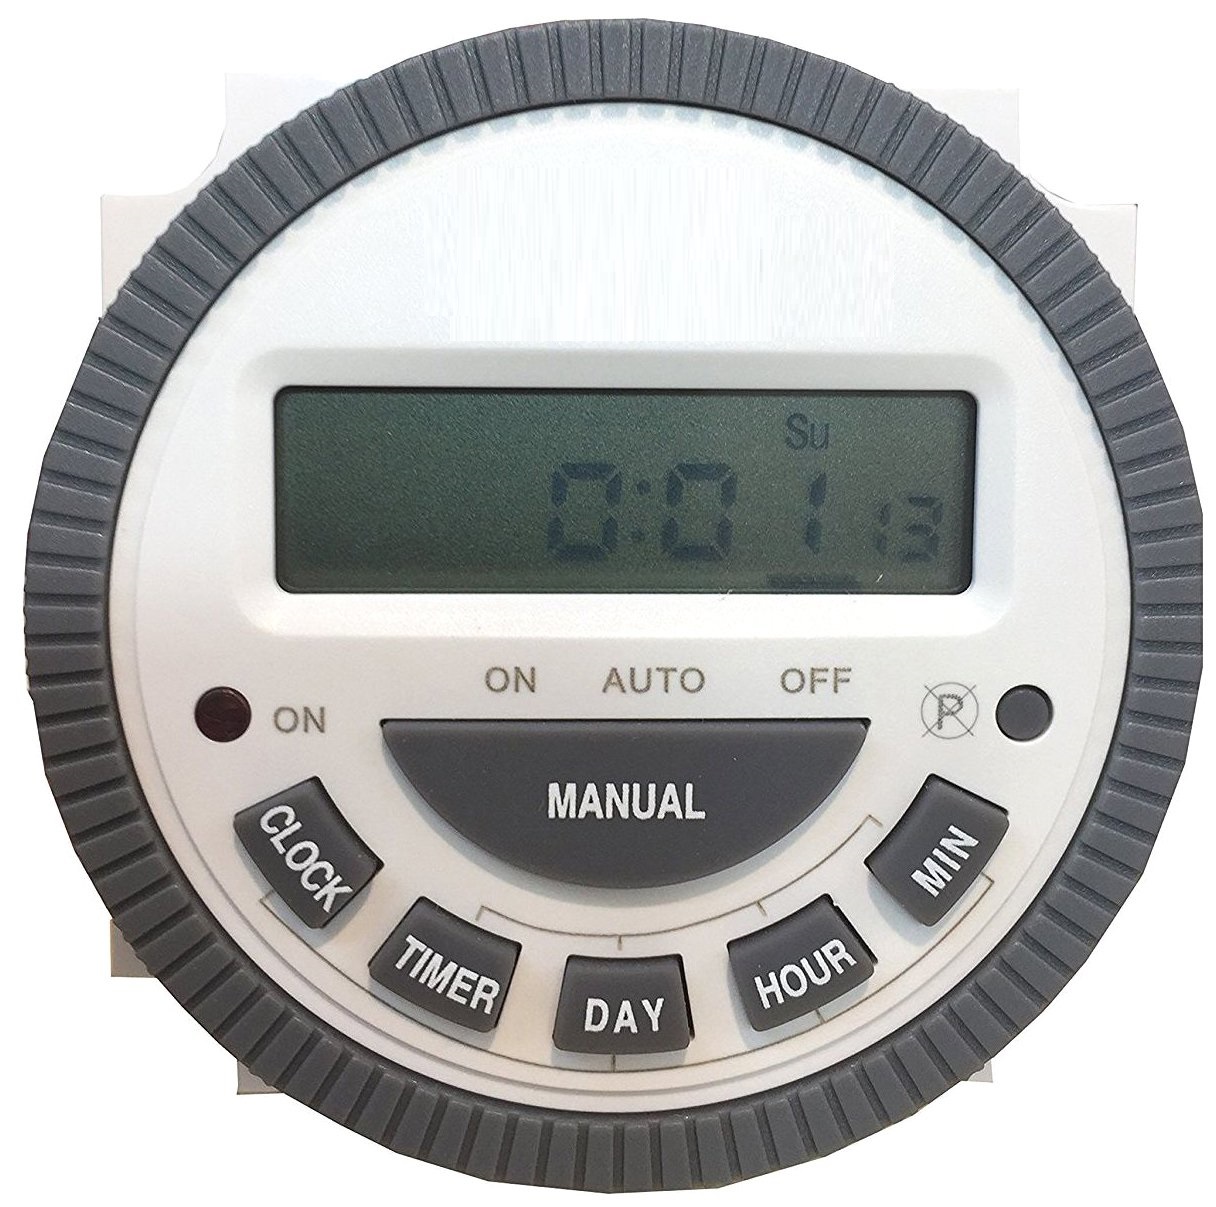 TM619H2 Digital Timer Programmable Time Switch with LCD 4 Pin